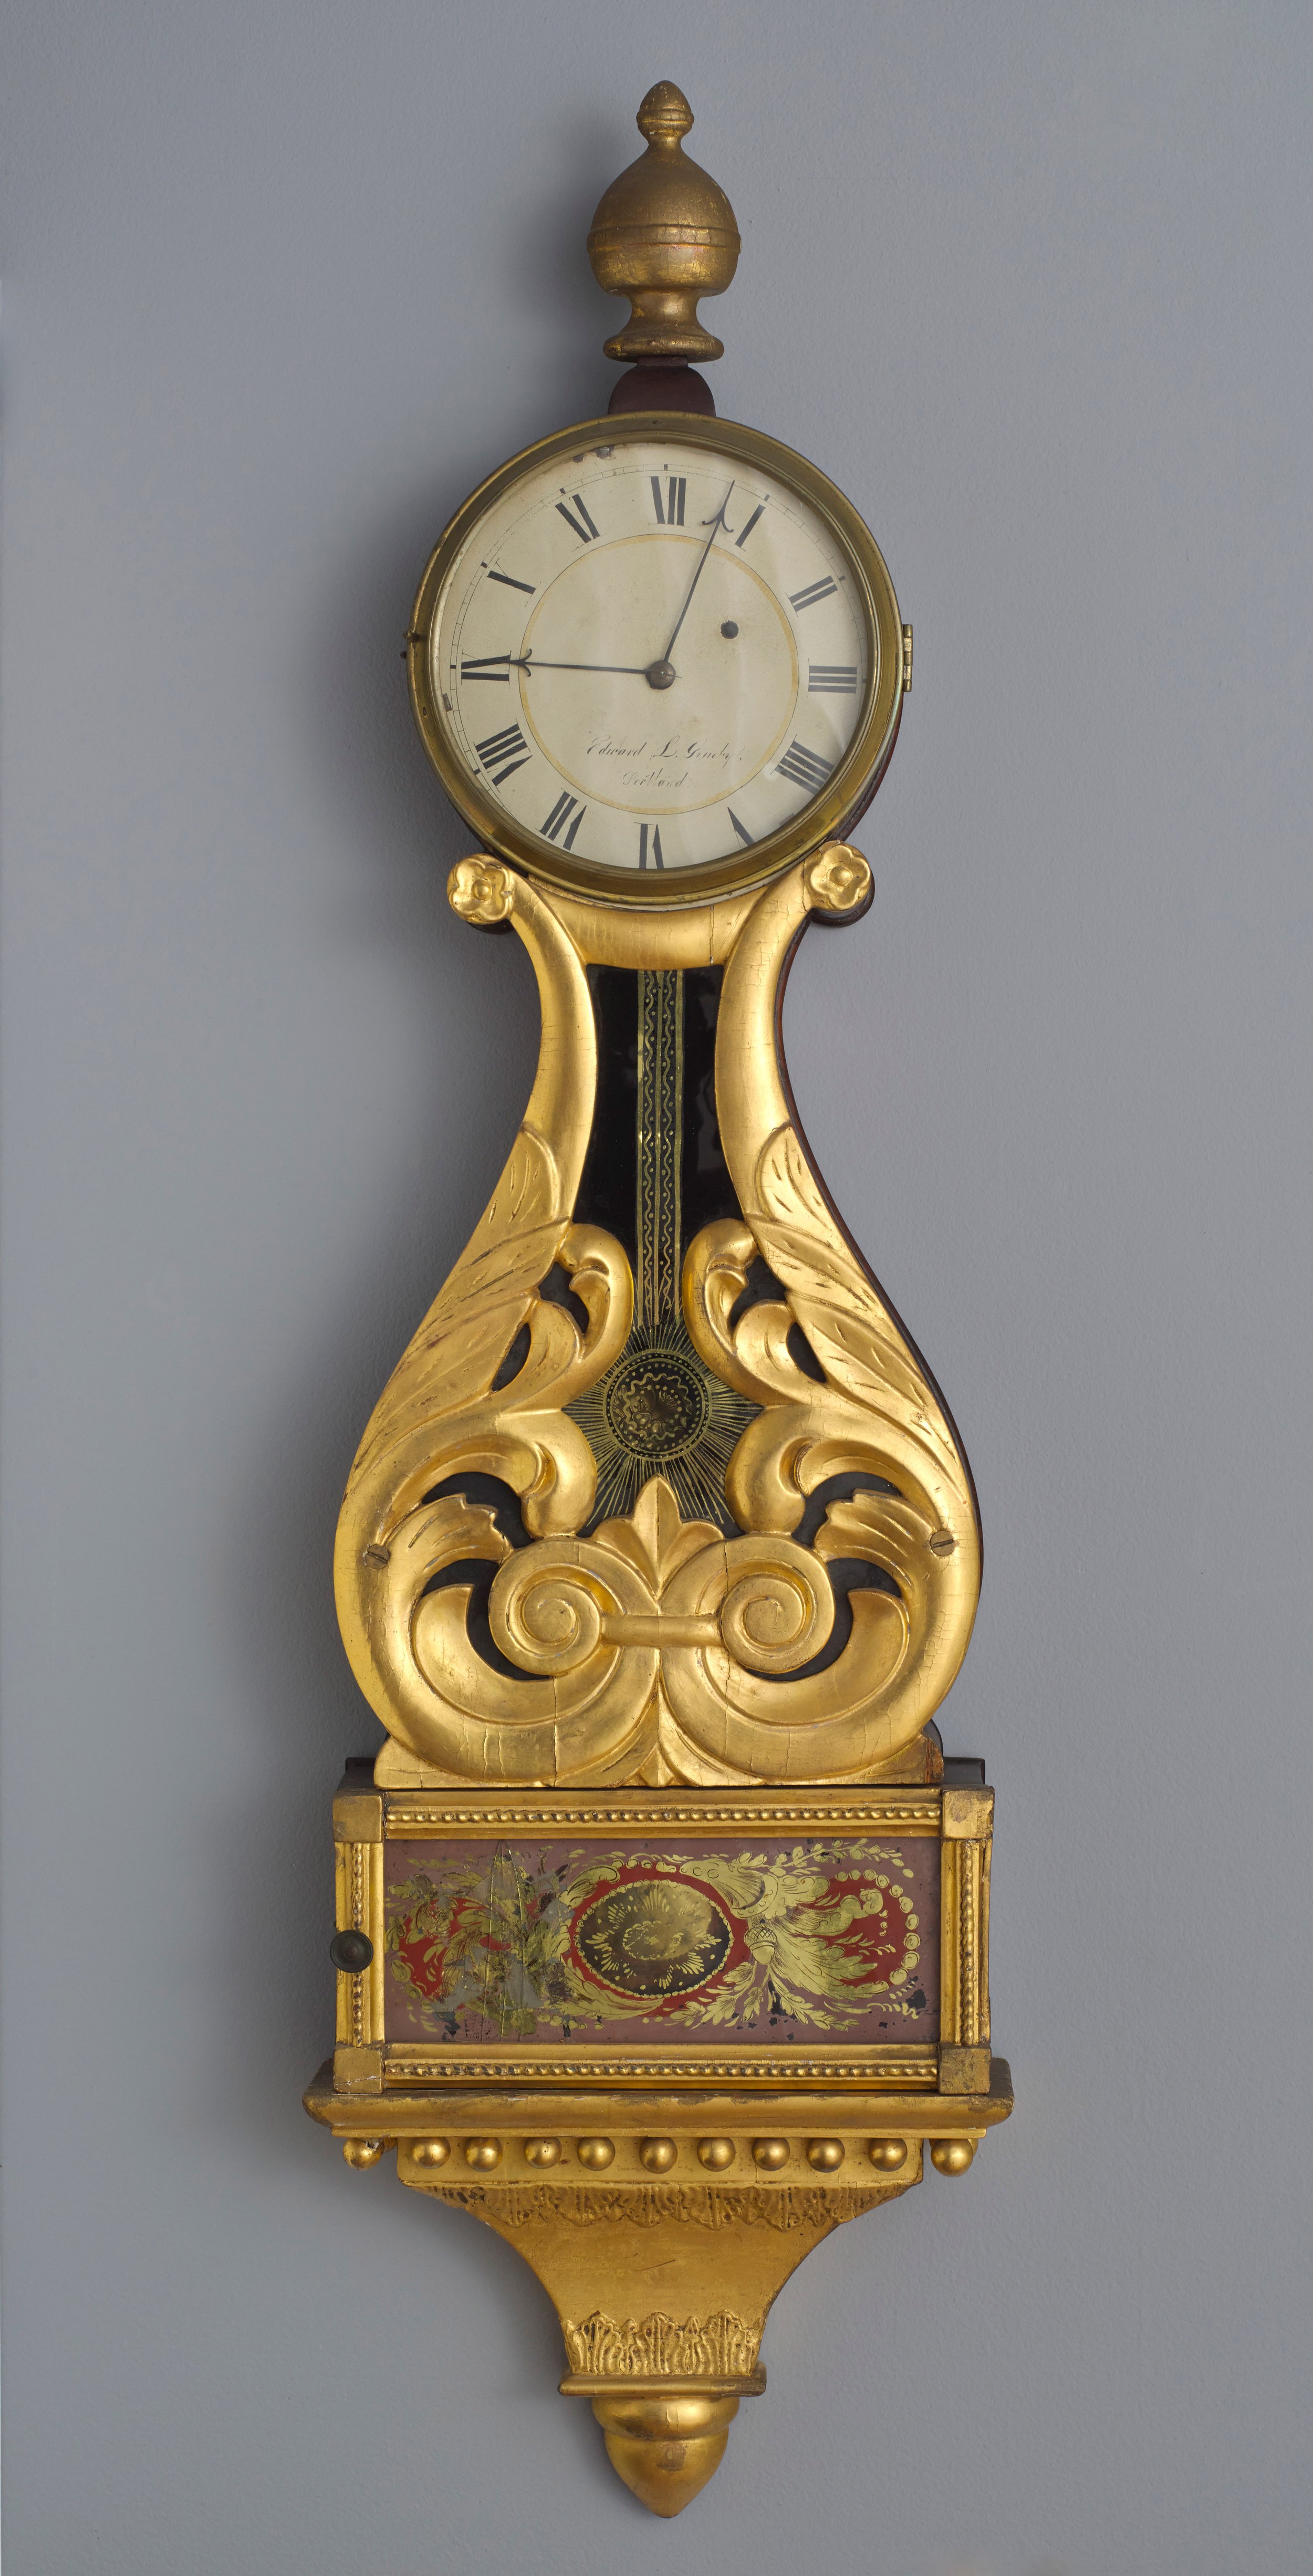   Edward Grueby  United States, 1808–1896  Wall Clock , 1830–1839 pine, brass, gilt, and verre églomisé, 41 1/2 x 11 3/4 x 3 7/8 inches Museum purchase with support from Friends of the Collection, the Margaret H. Jewell Fund, Mr. and Mrs. Fletcher Br